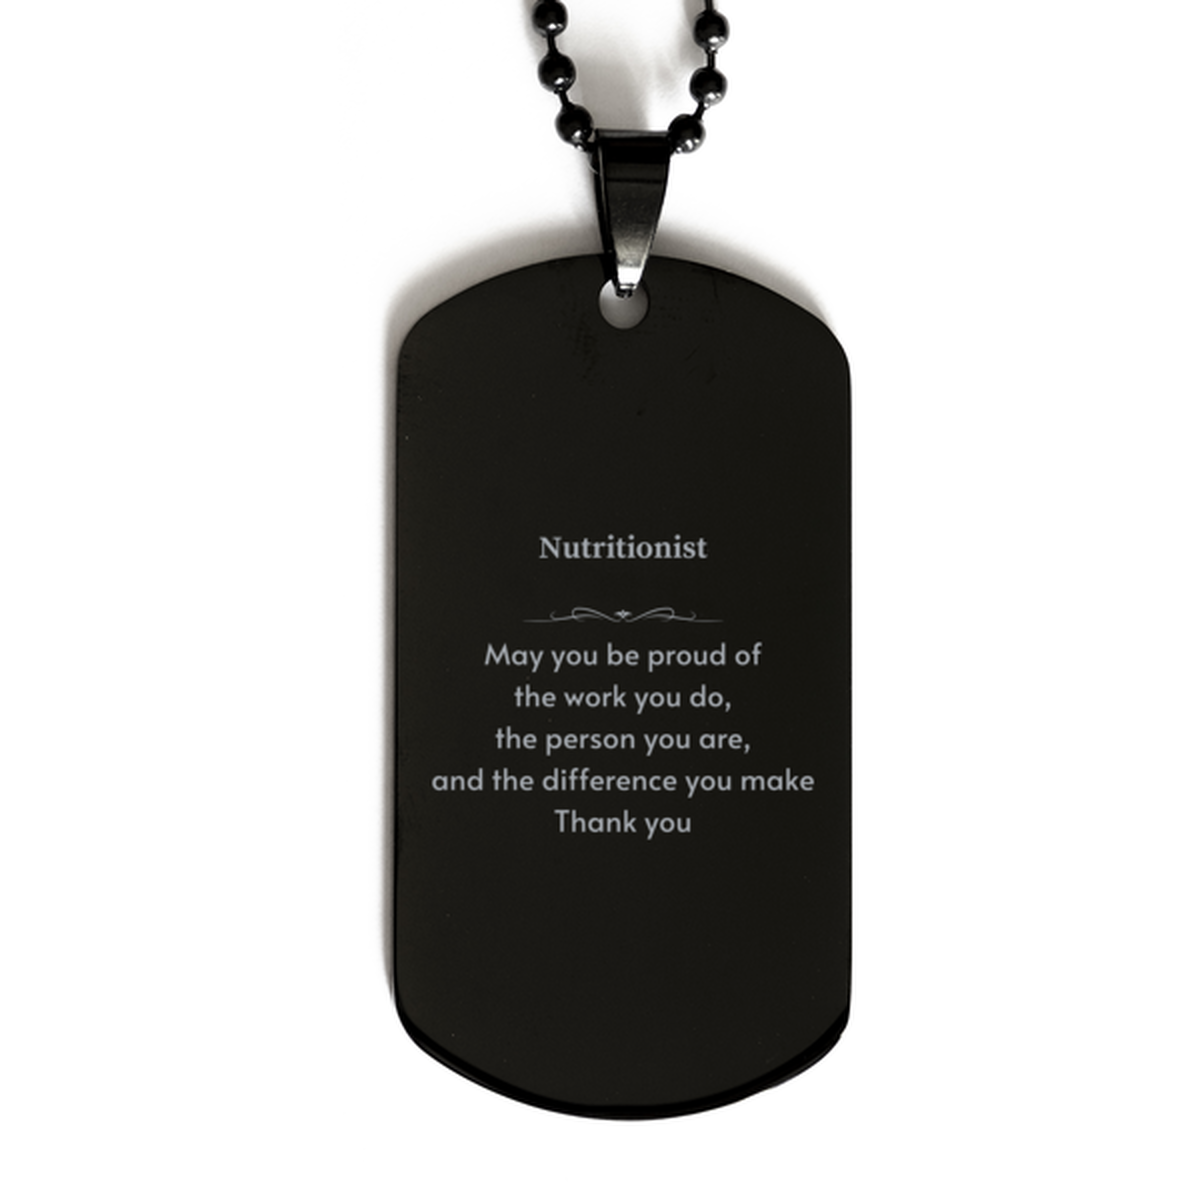 Heartwarming Black Dog Tag Retirement Coworkers Gifts for Nutritionist, Nutritionist May You be proud of the work you do, the person you are Gifts for Boss Men Women Friends